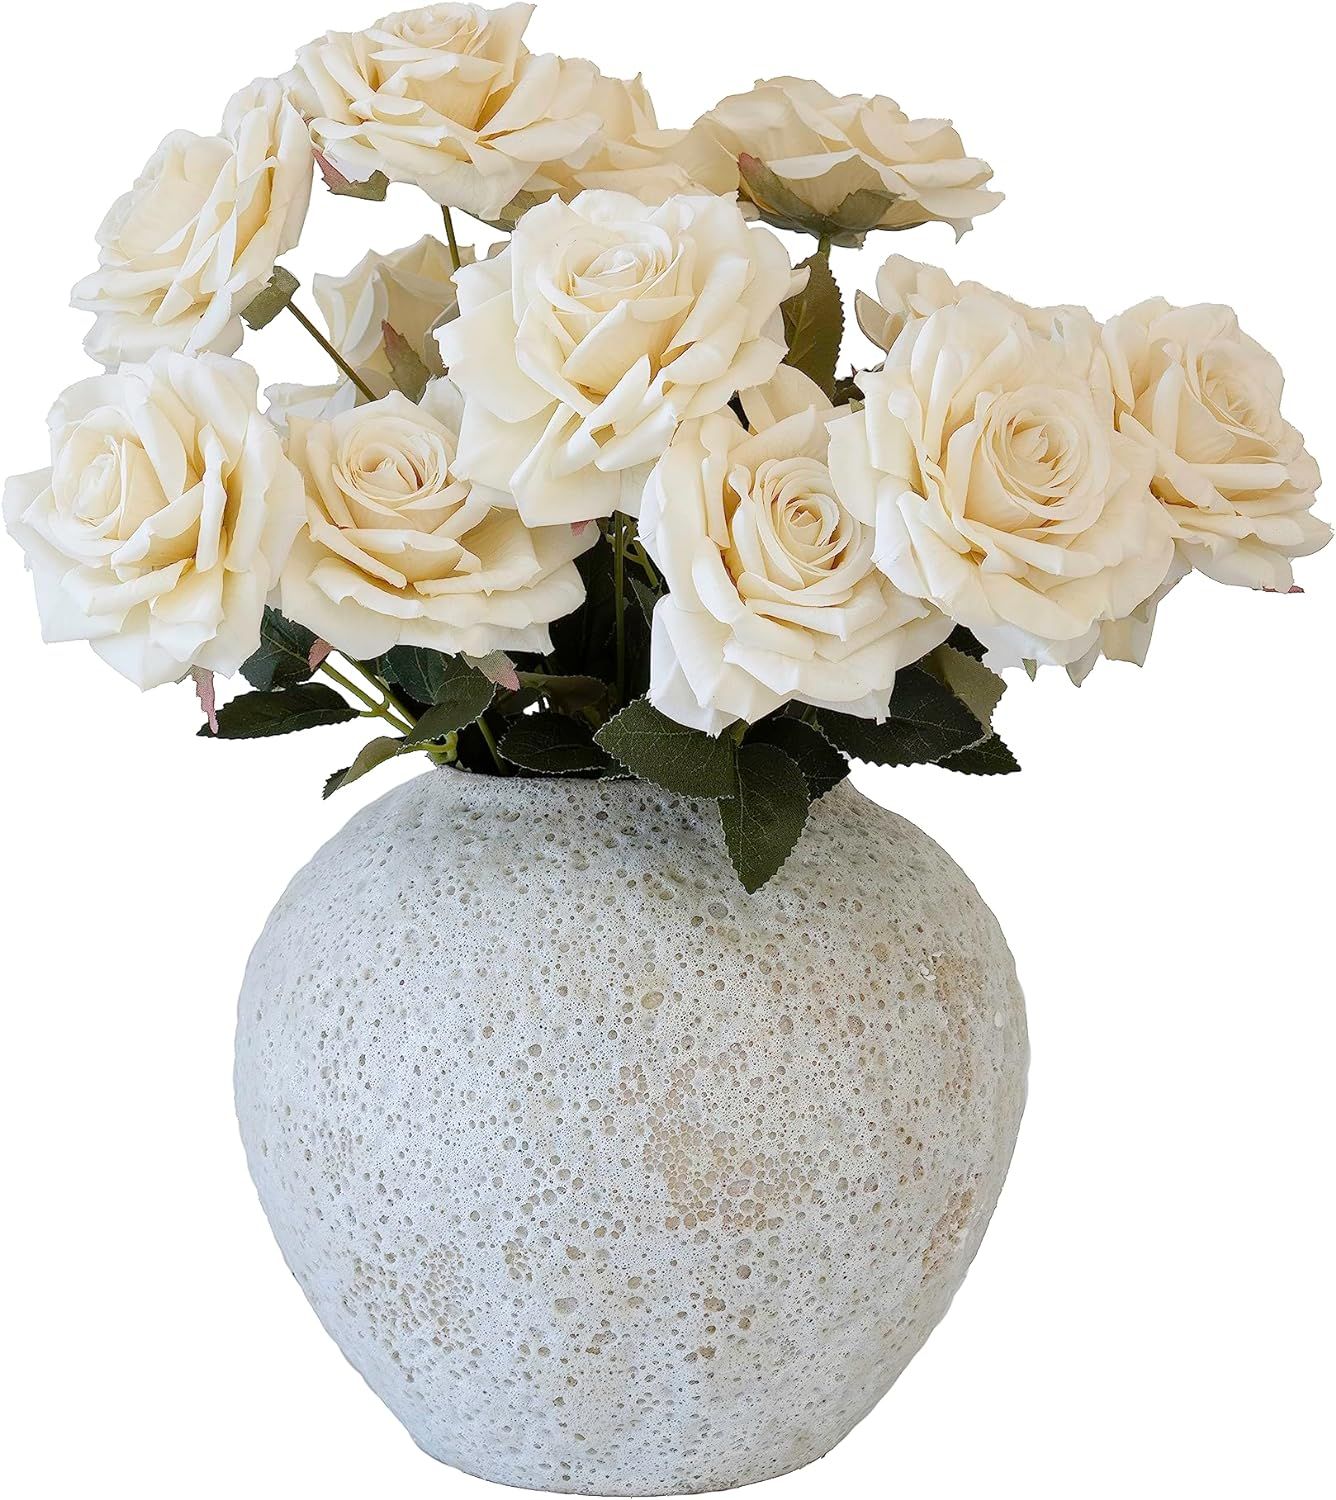 CozyWel White Ceramic Vase with Ivory White Artificial Rose Bundles, Silk Roses in Vase for Home ... | Amazon (US)